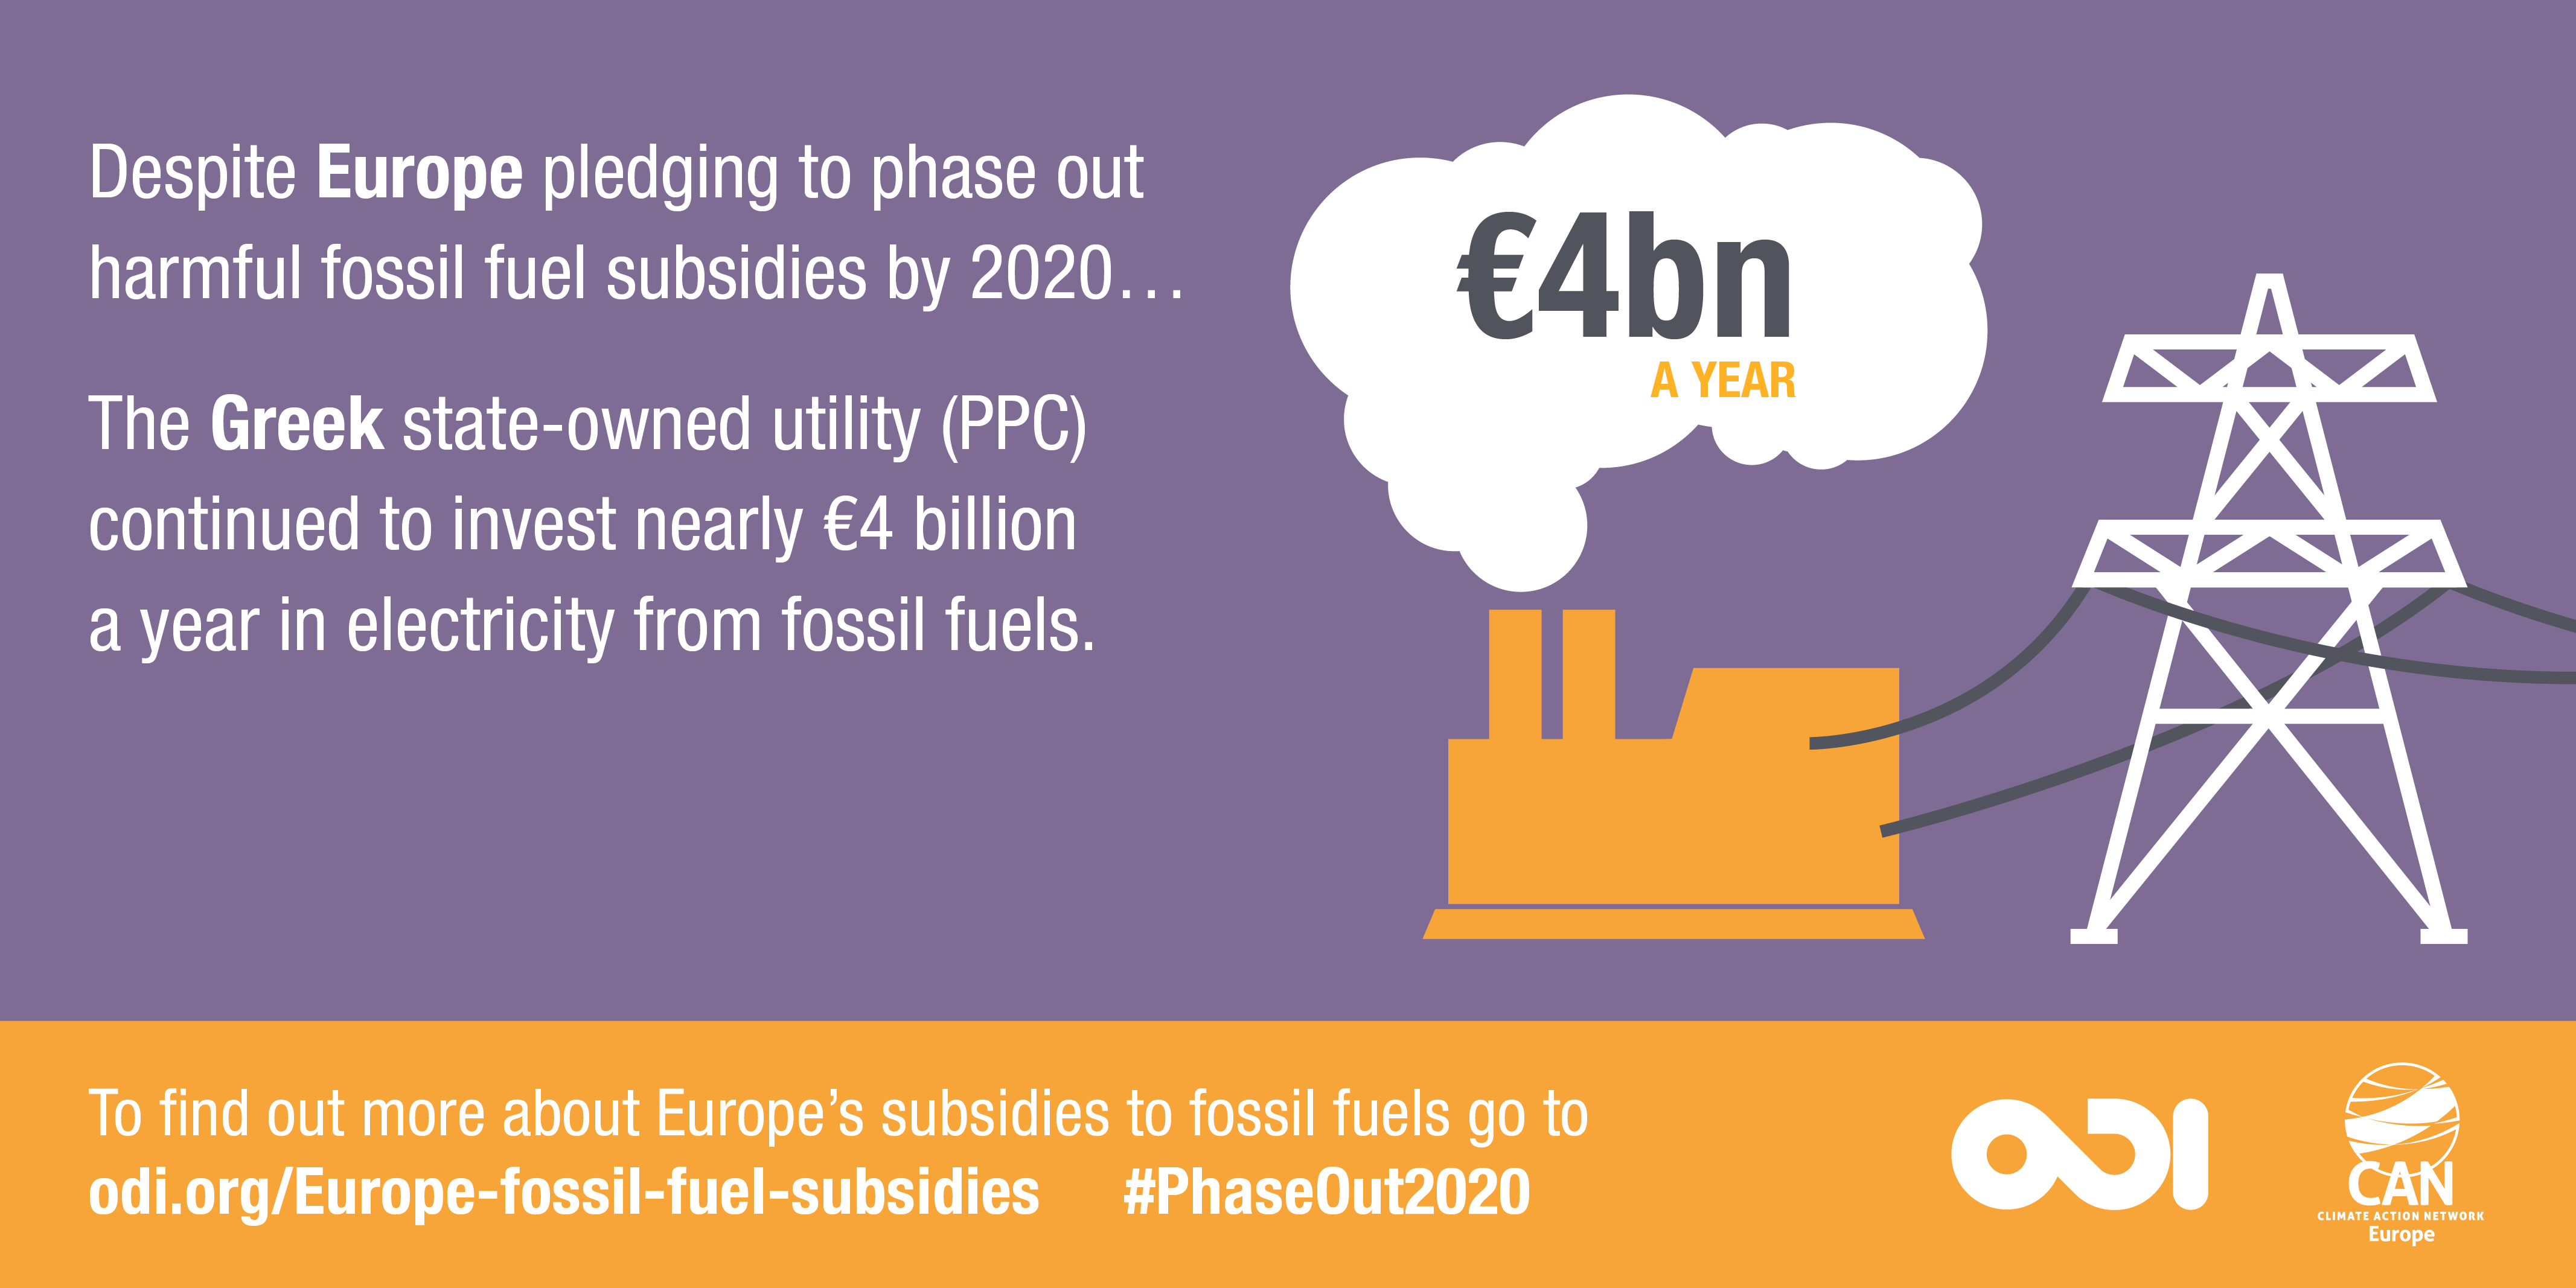 Infographic: The Greek state-owned utility (PPC) continued to invest nearly €4 billion a year in electricity from fossil fuels.